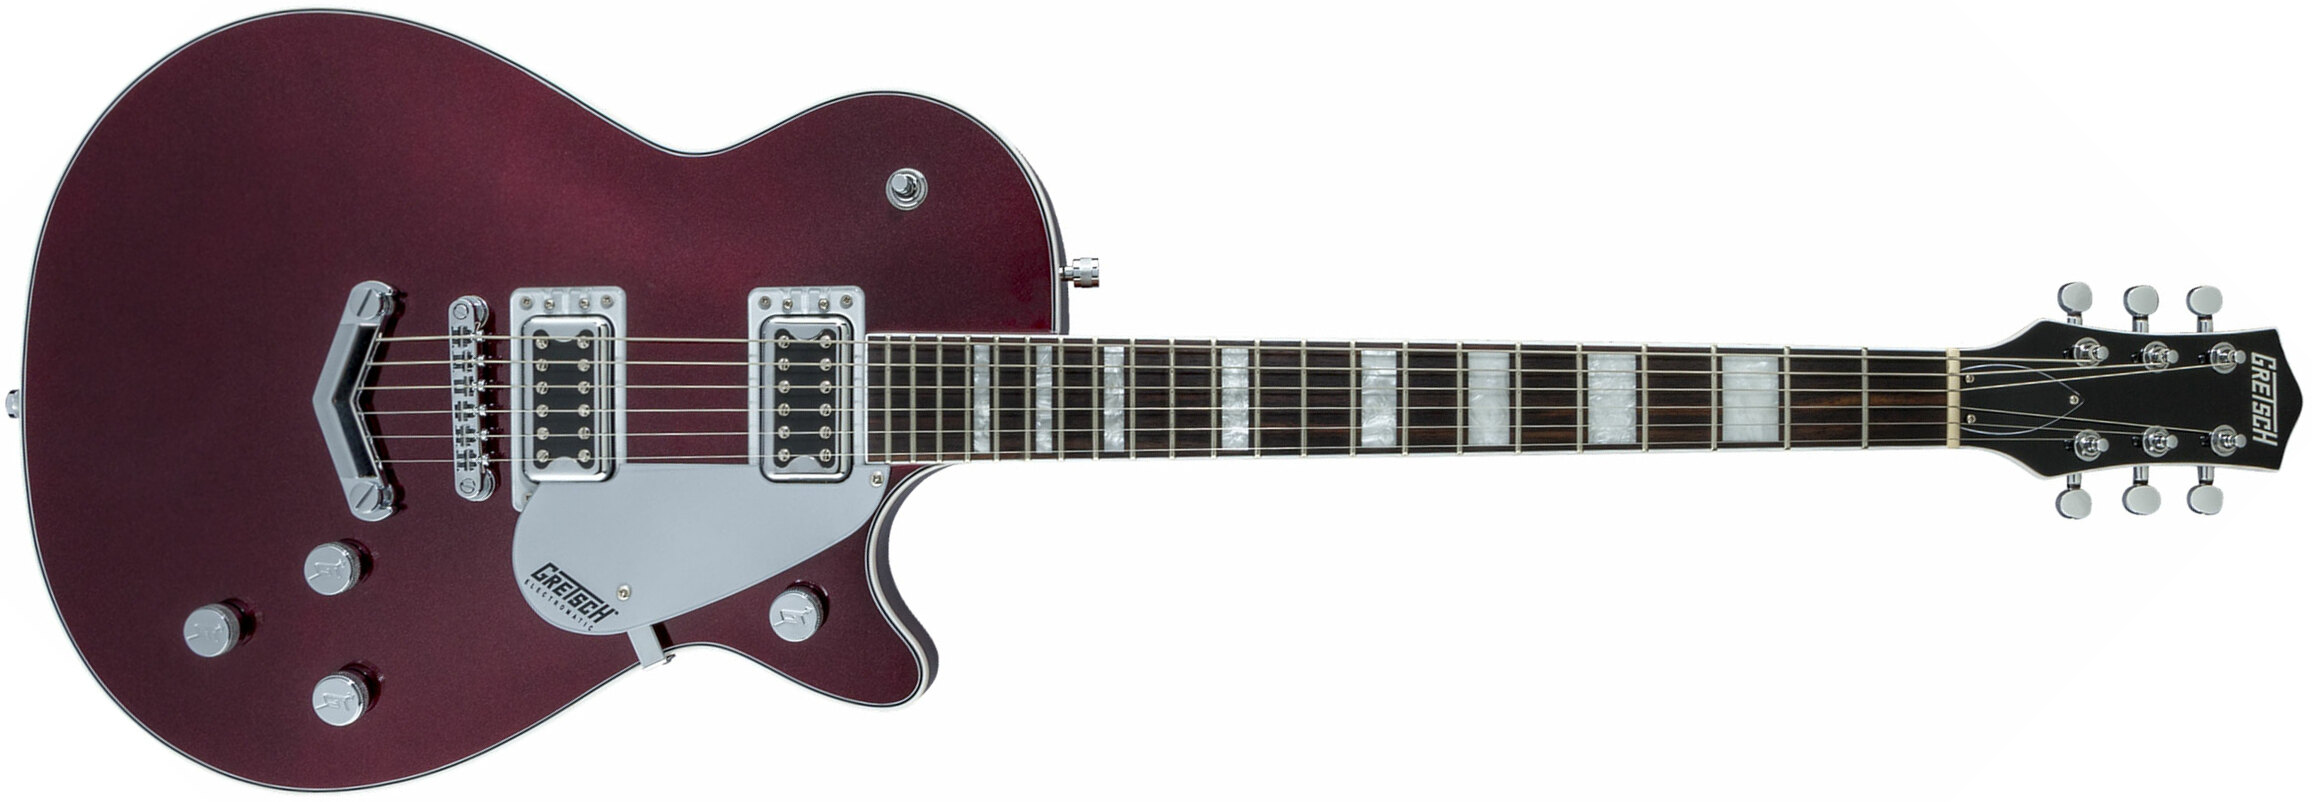 Gretsch G5220 Electromatic Jet Bt V-stoptail Hh Ht Wal - Dark Cherry Metallic - Single cut electric guitar - Main picture